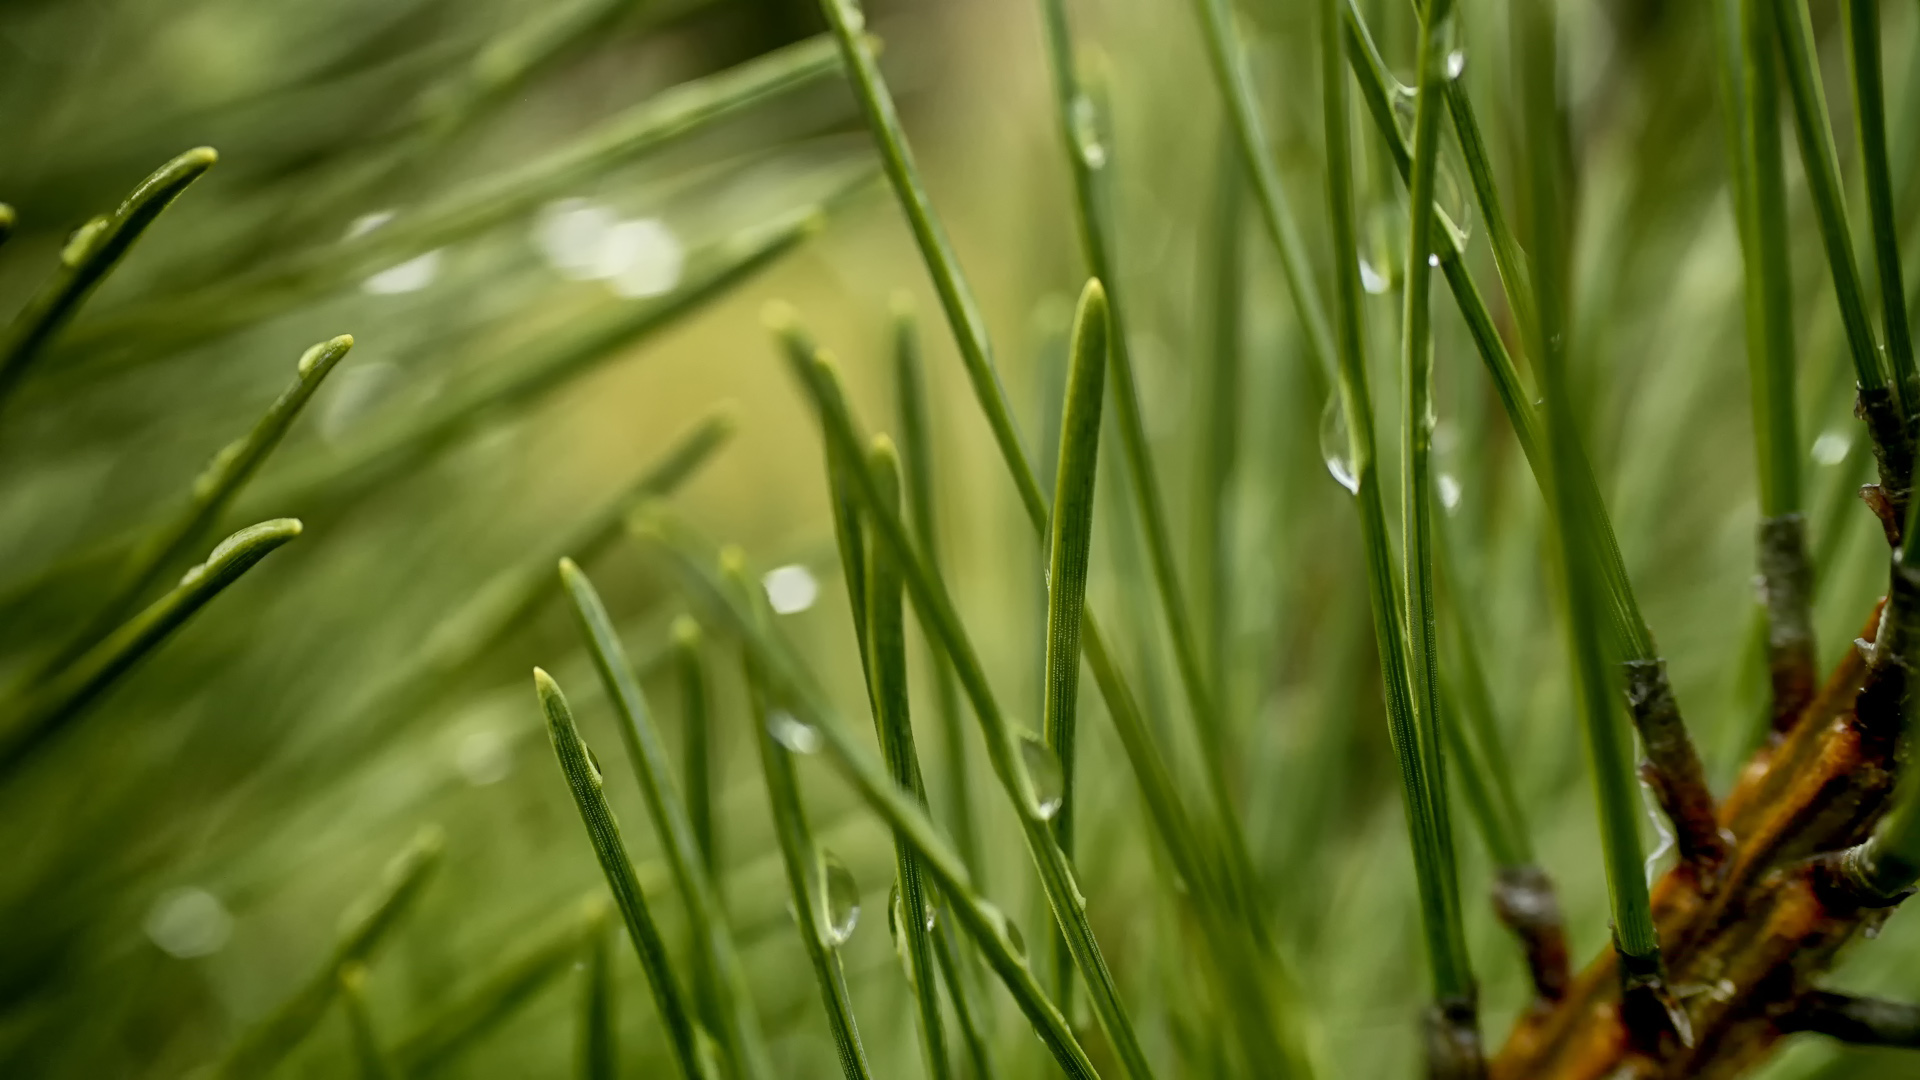 General 1920x1080 pine trees macro nature closeup water drops trees forest photography wet green